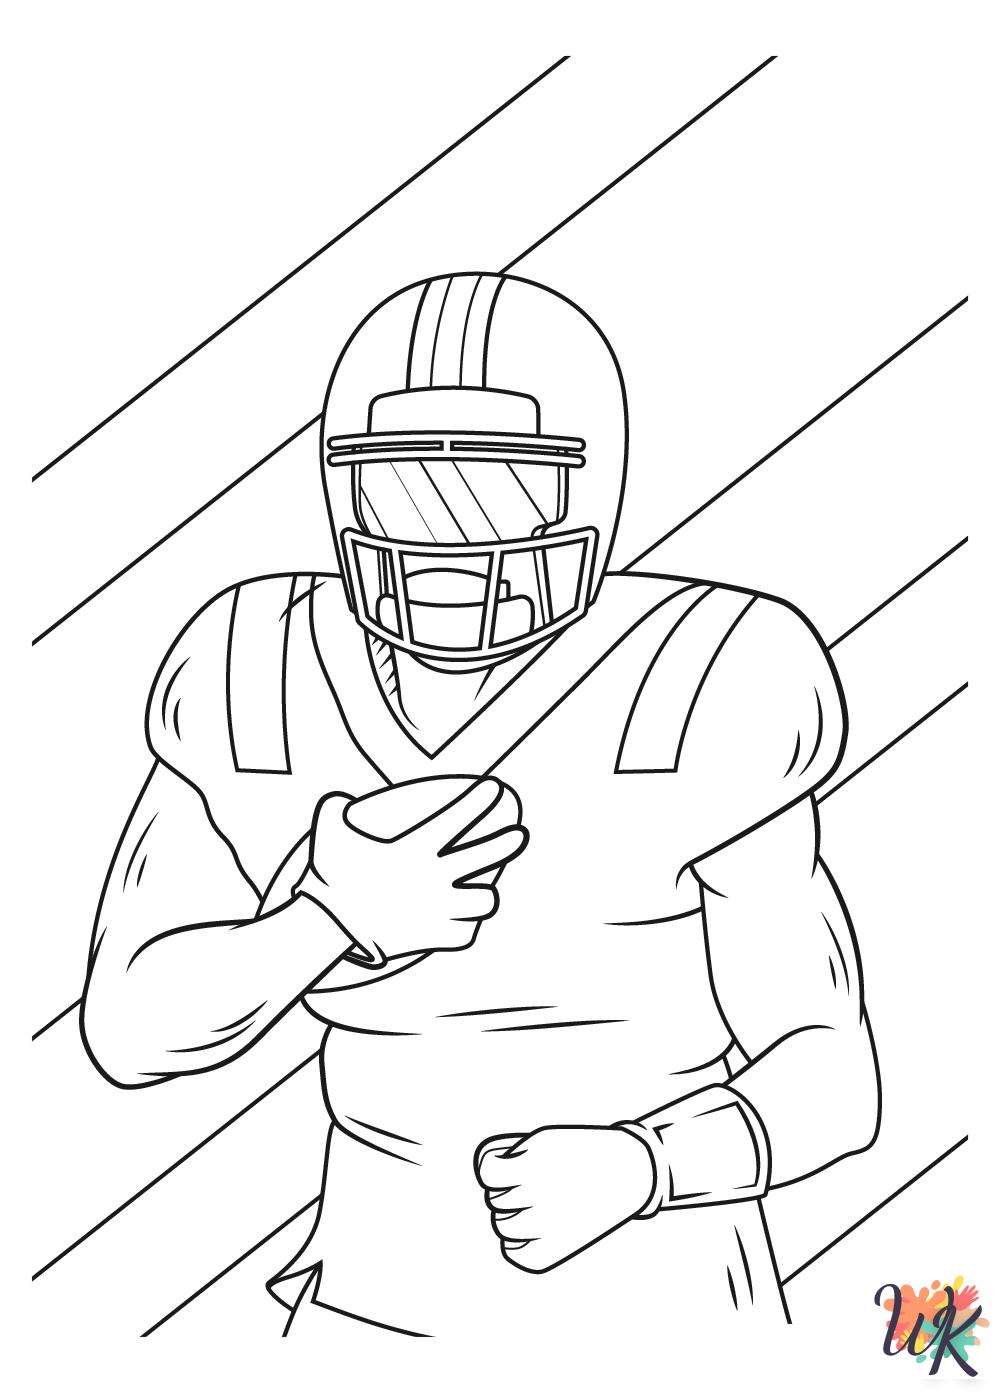 coloring NFL pages